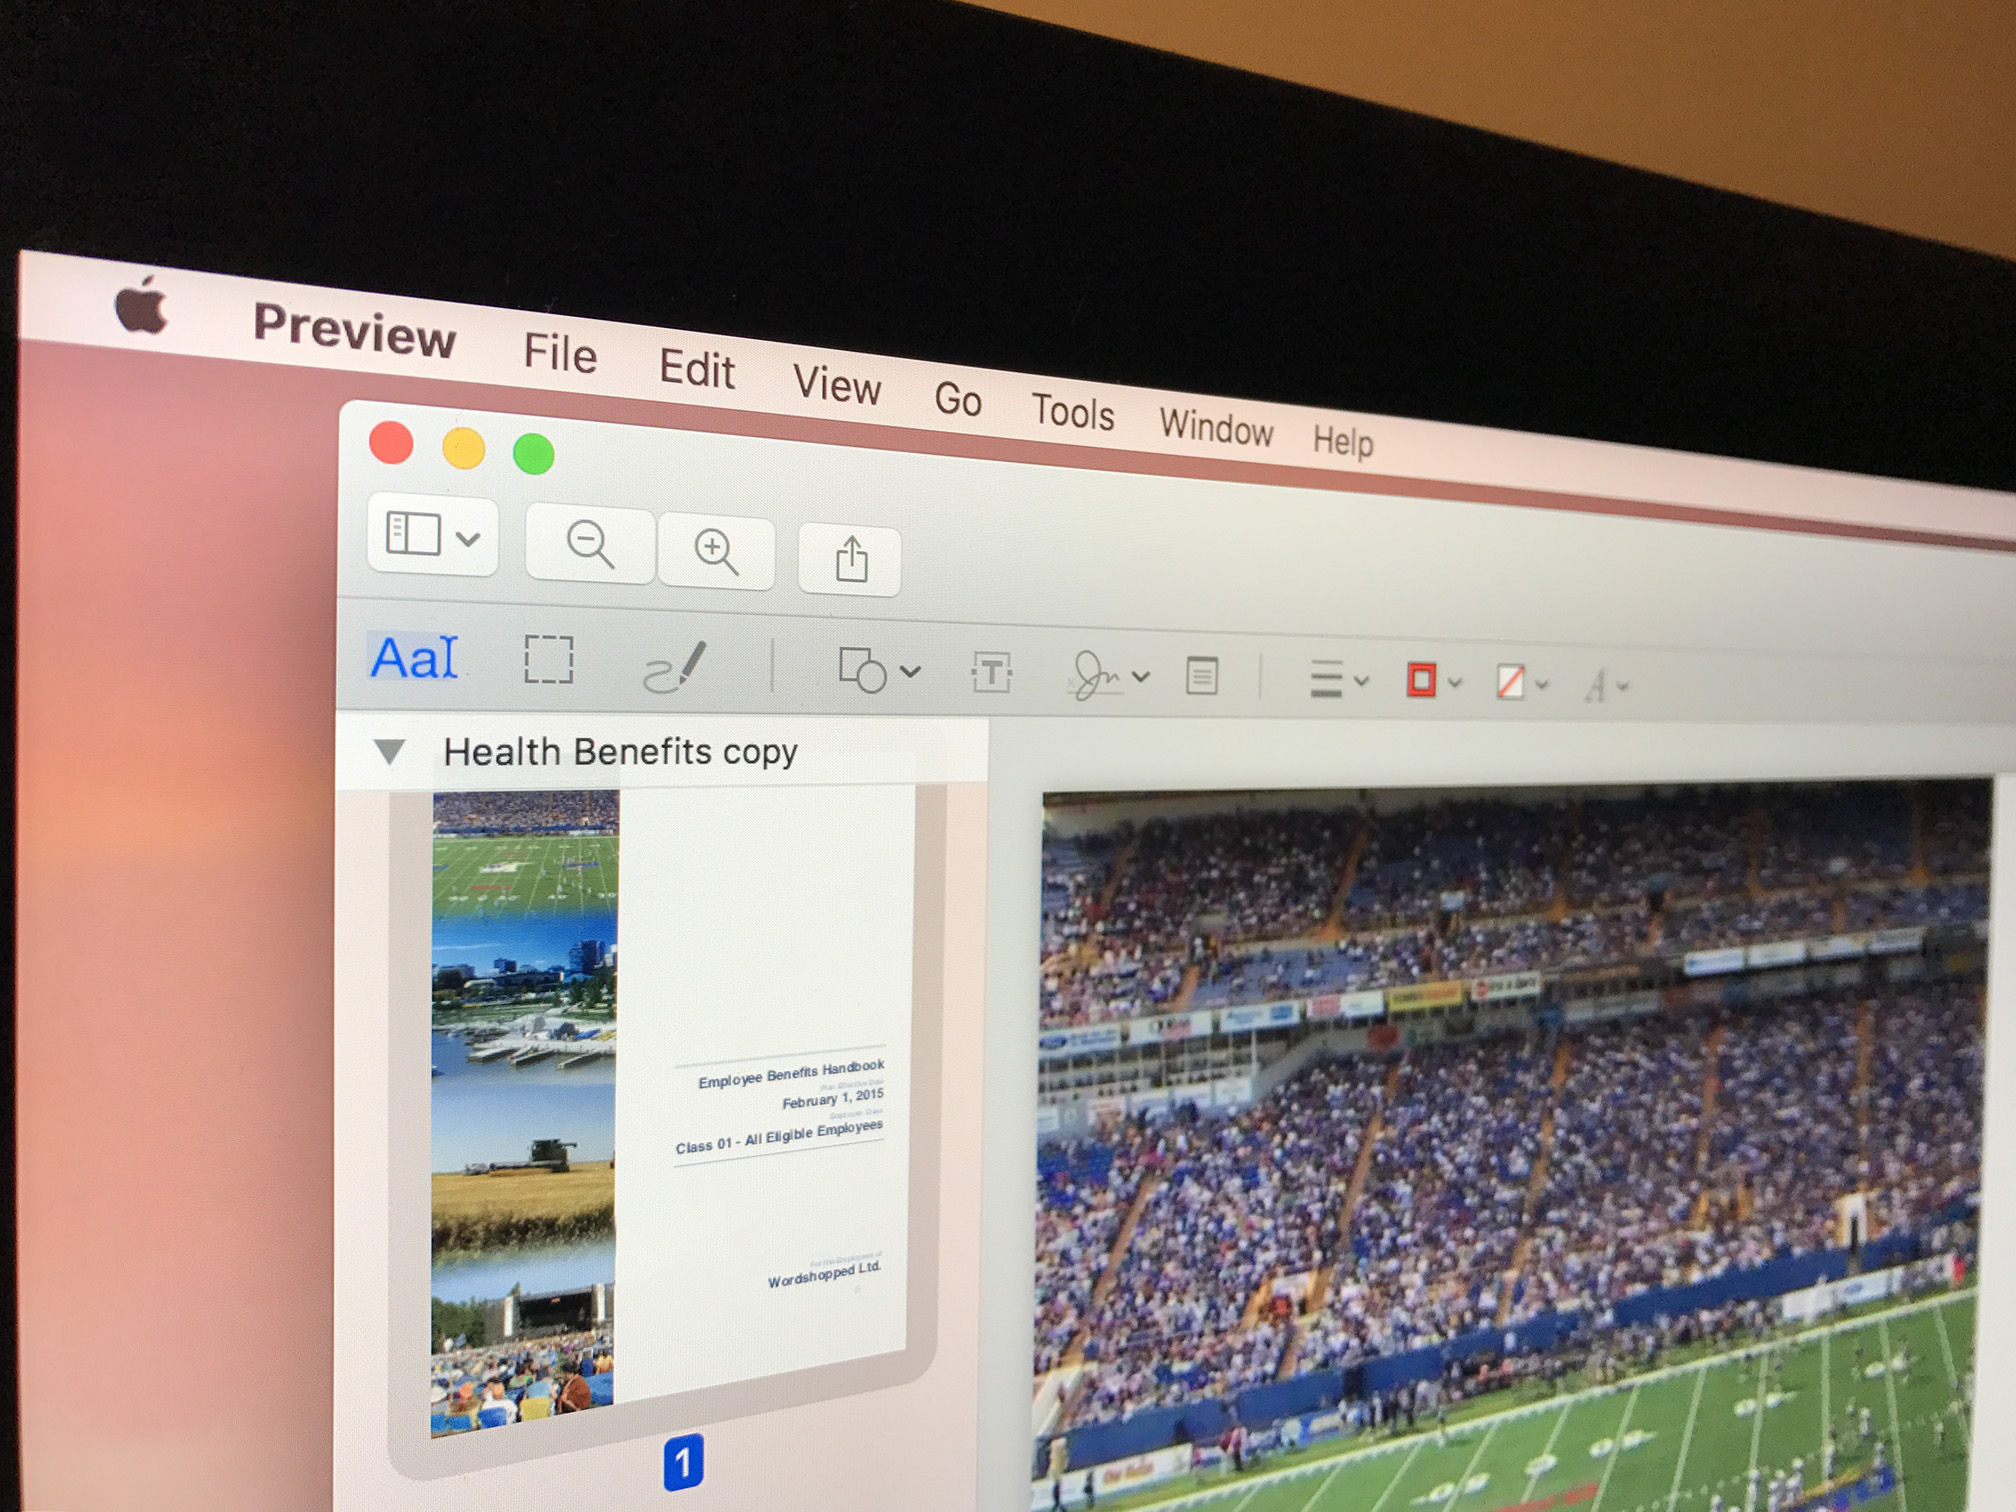 How to use Preview on Mac